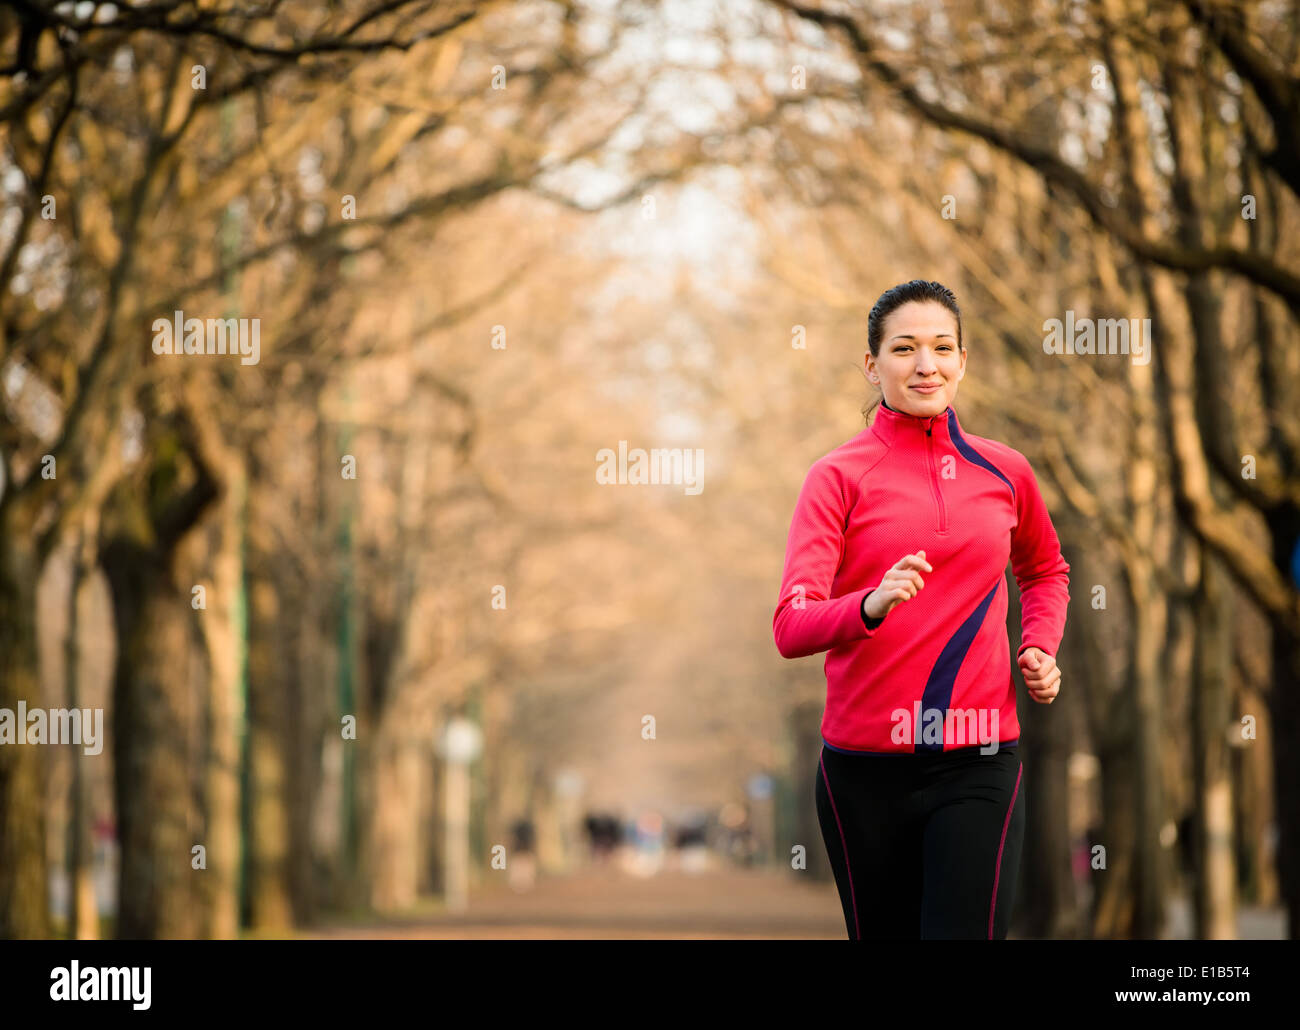 Young woman jogging in tree alley - late autumn Stock Photo